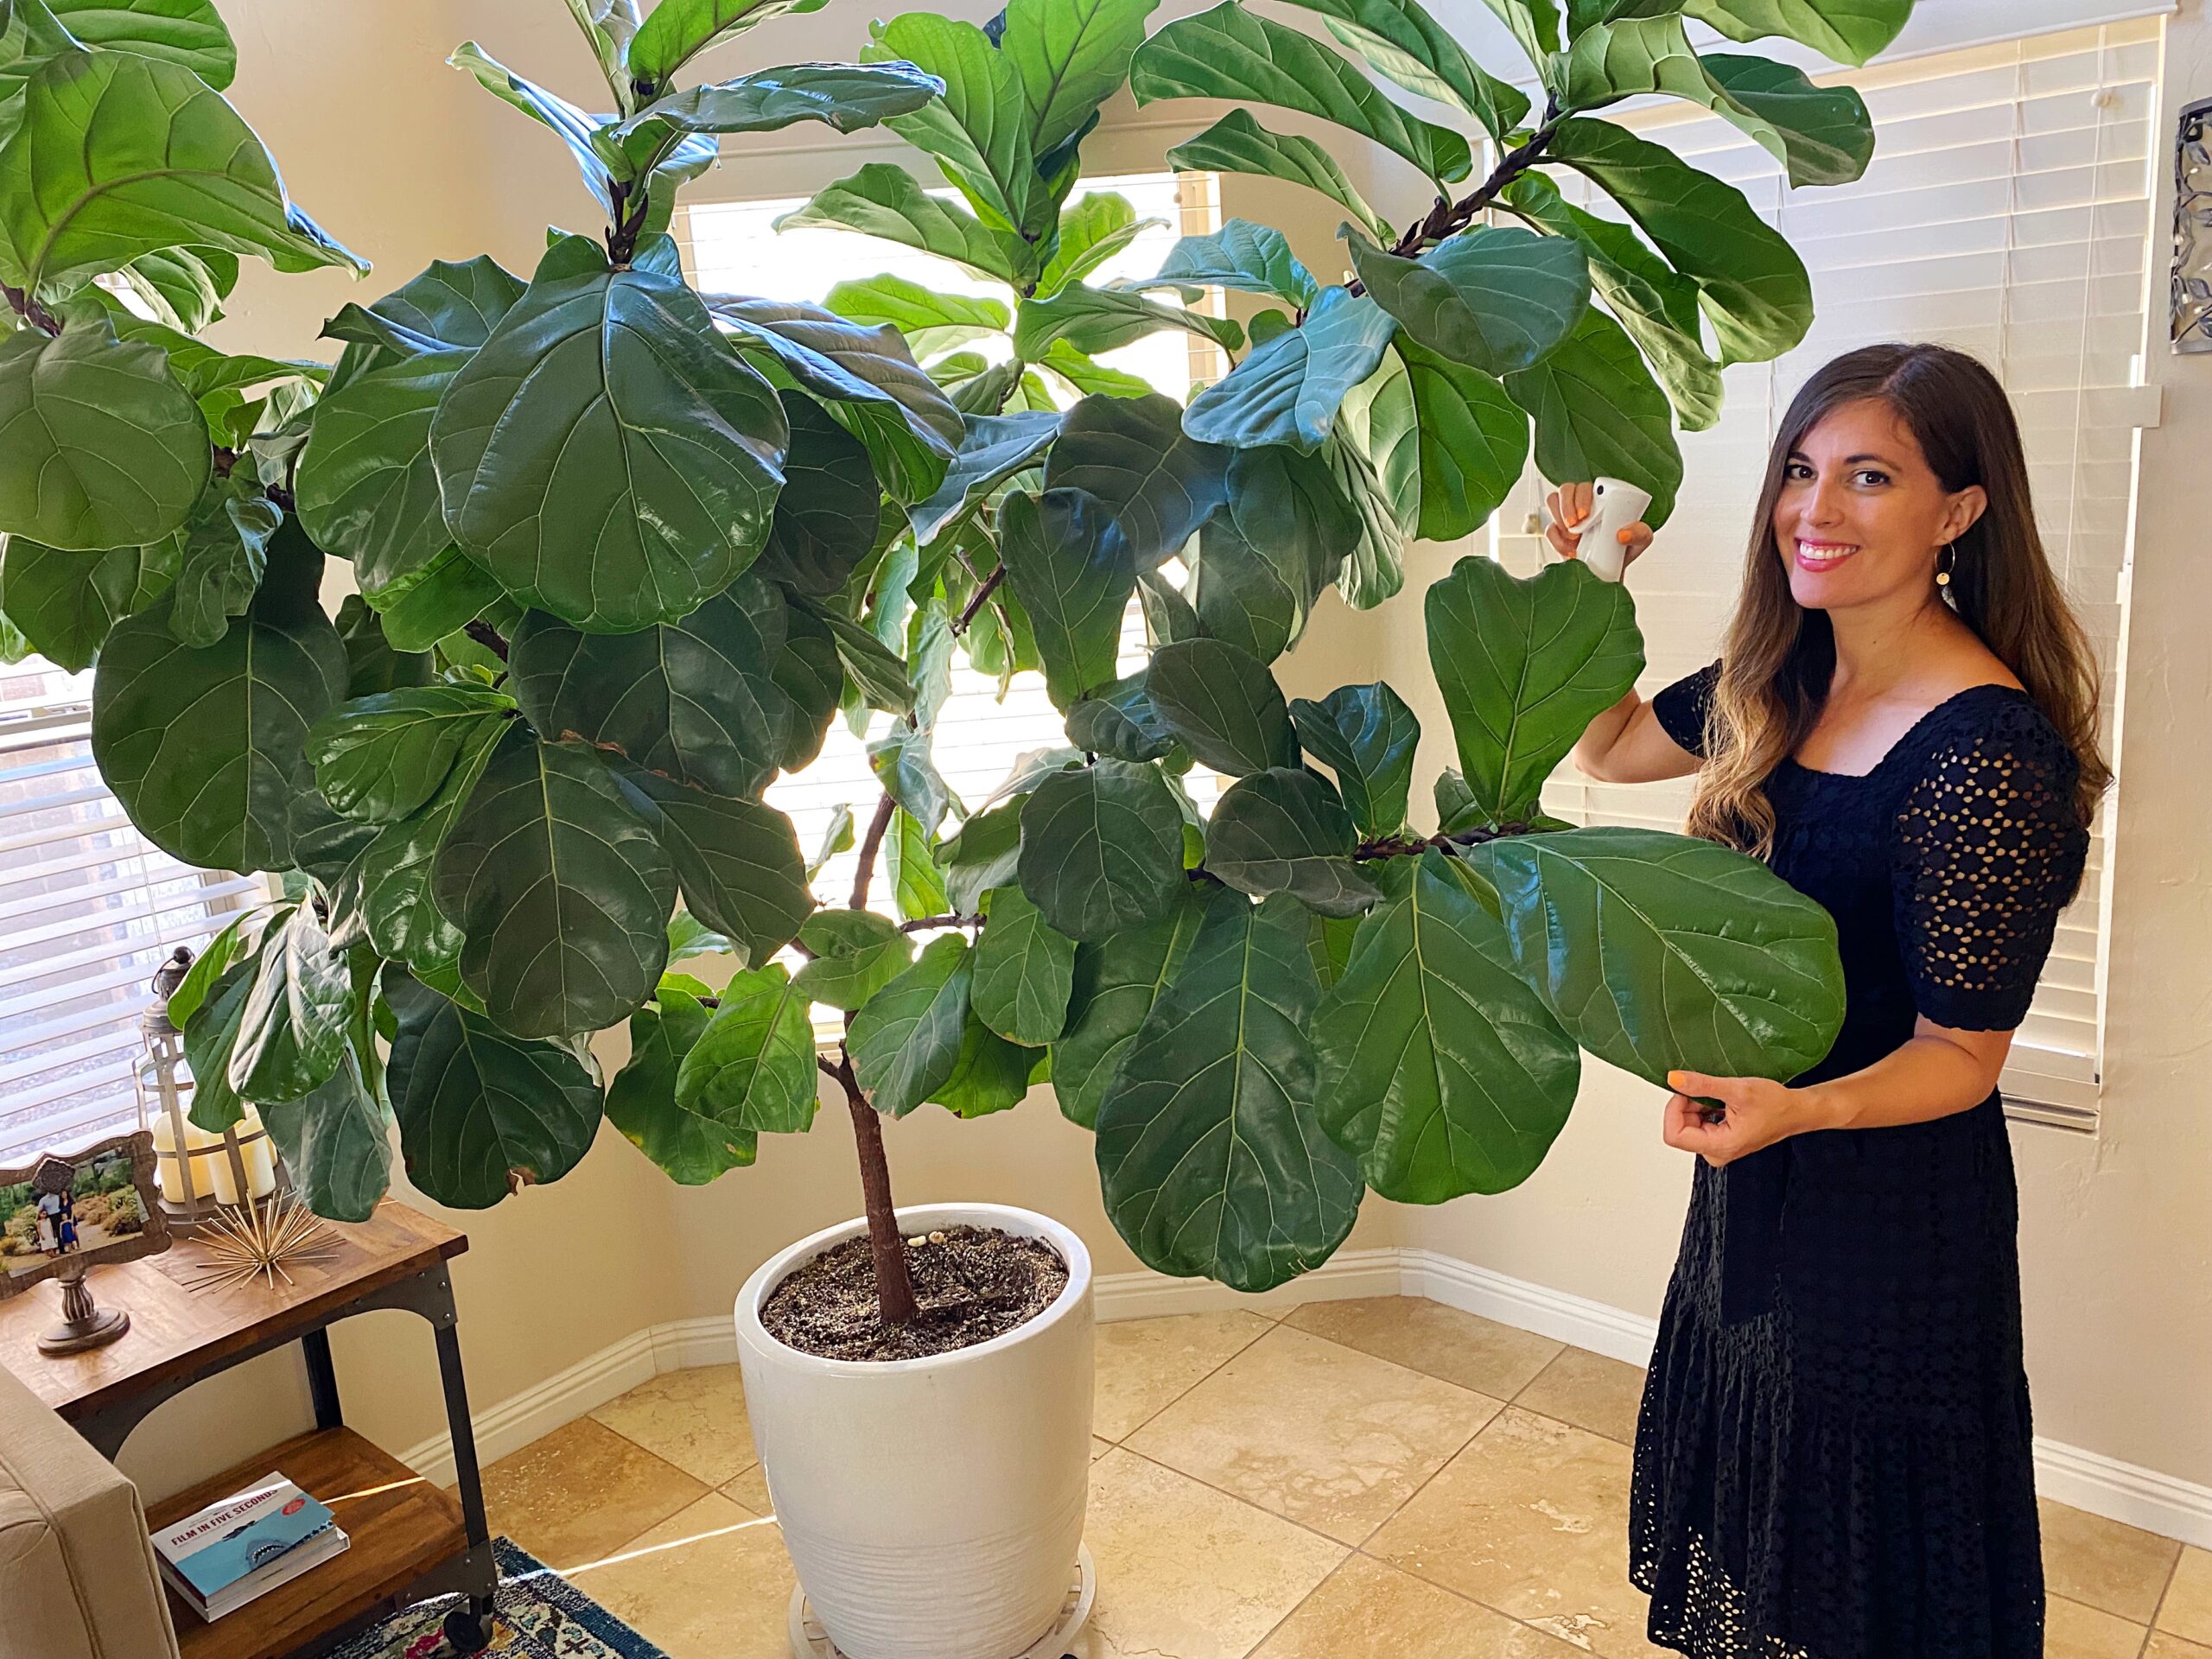 Dare struktur civilisere How To Take Care Of A Fiddle Leaf Fig Tree - The Fitnessista